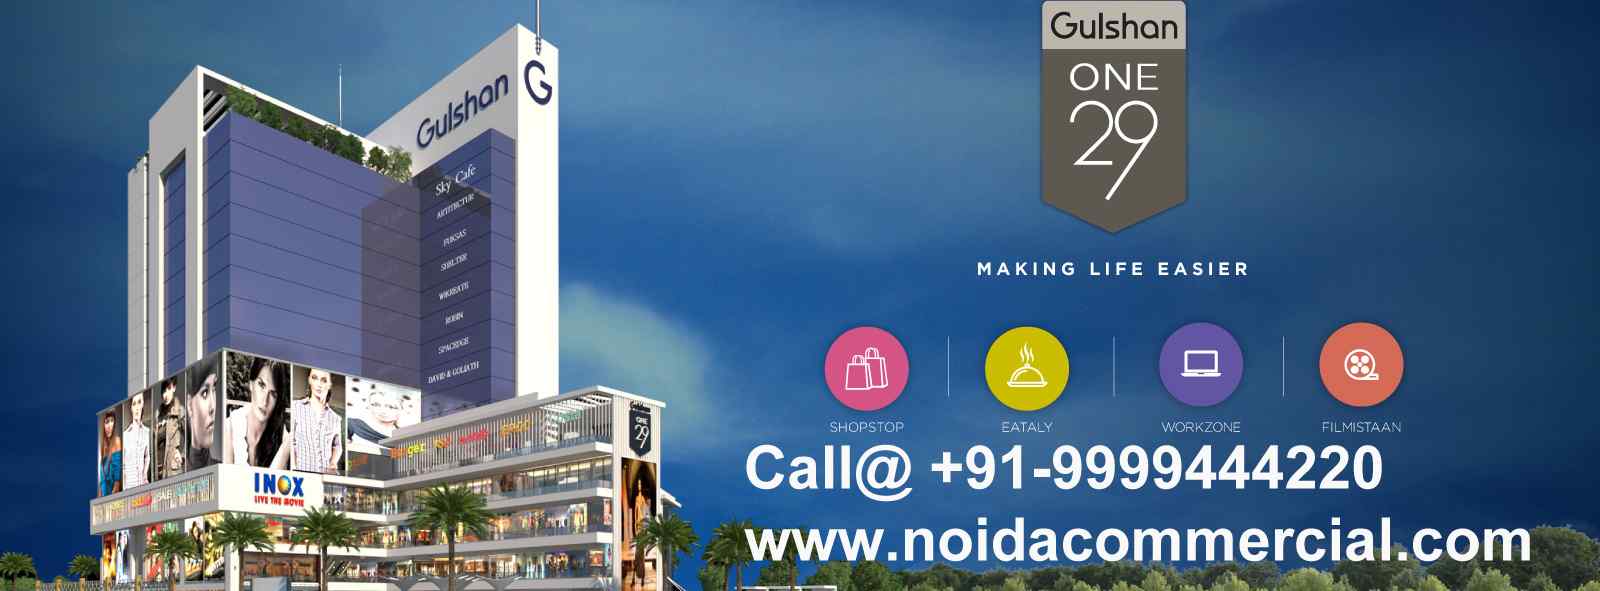 Gulshan Homz Commercial Project in Noida Expressway